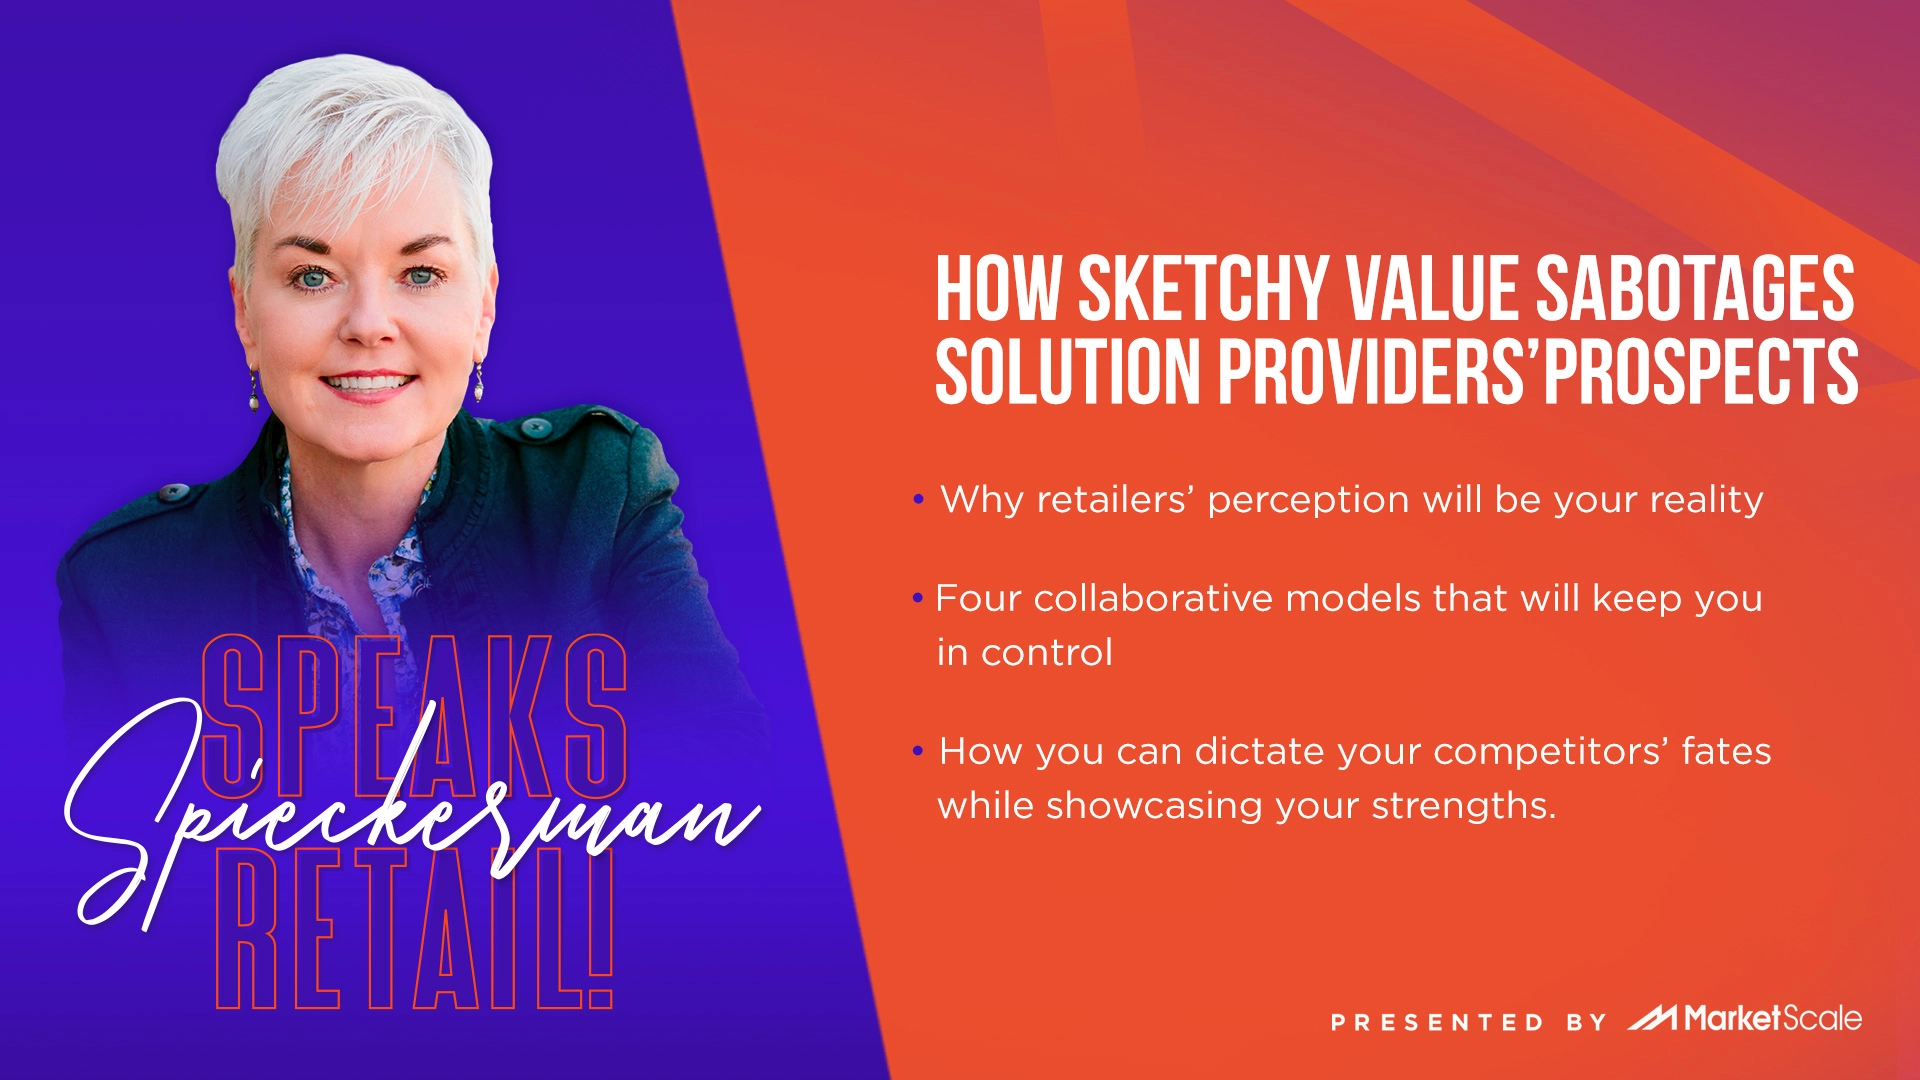 How Sketchy Value Sabotages Solution Providers’ Prospects